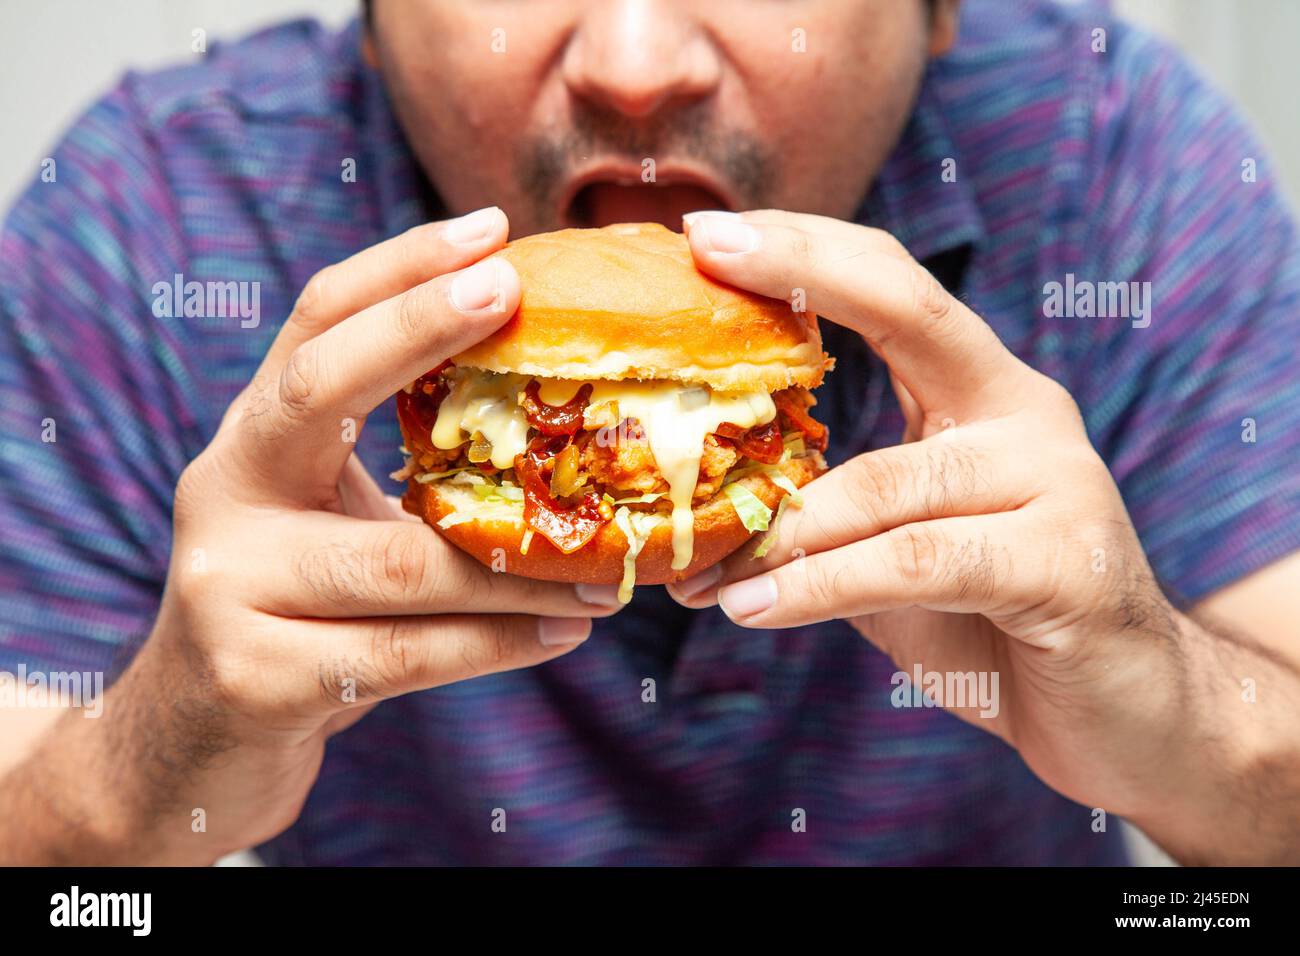 Eastern man looking at crispy chicken burger and is about to eat it. Stock Photo